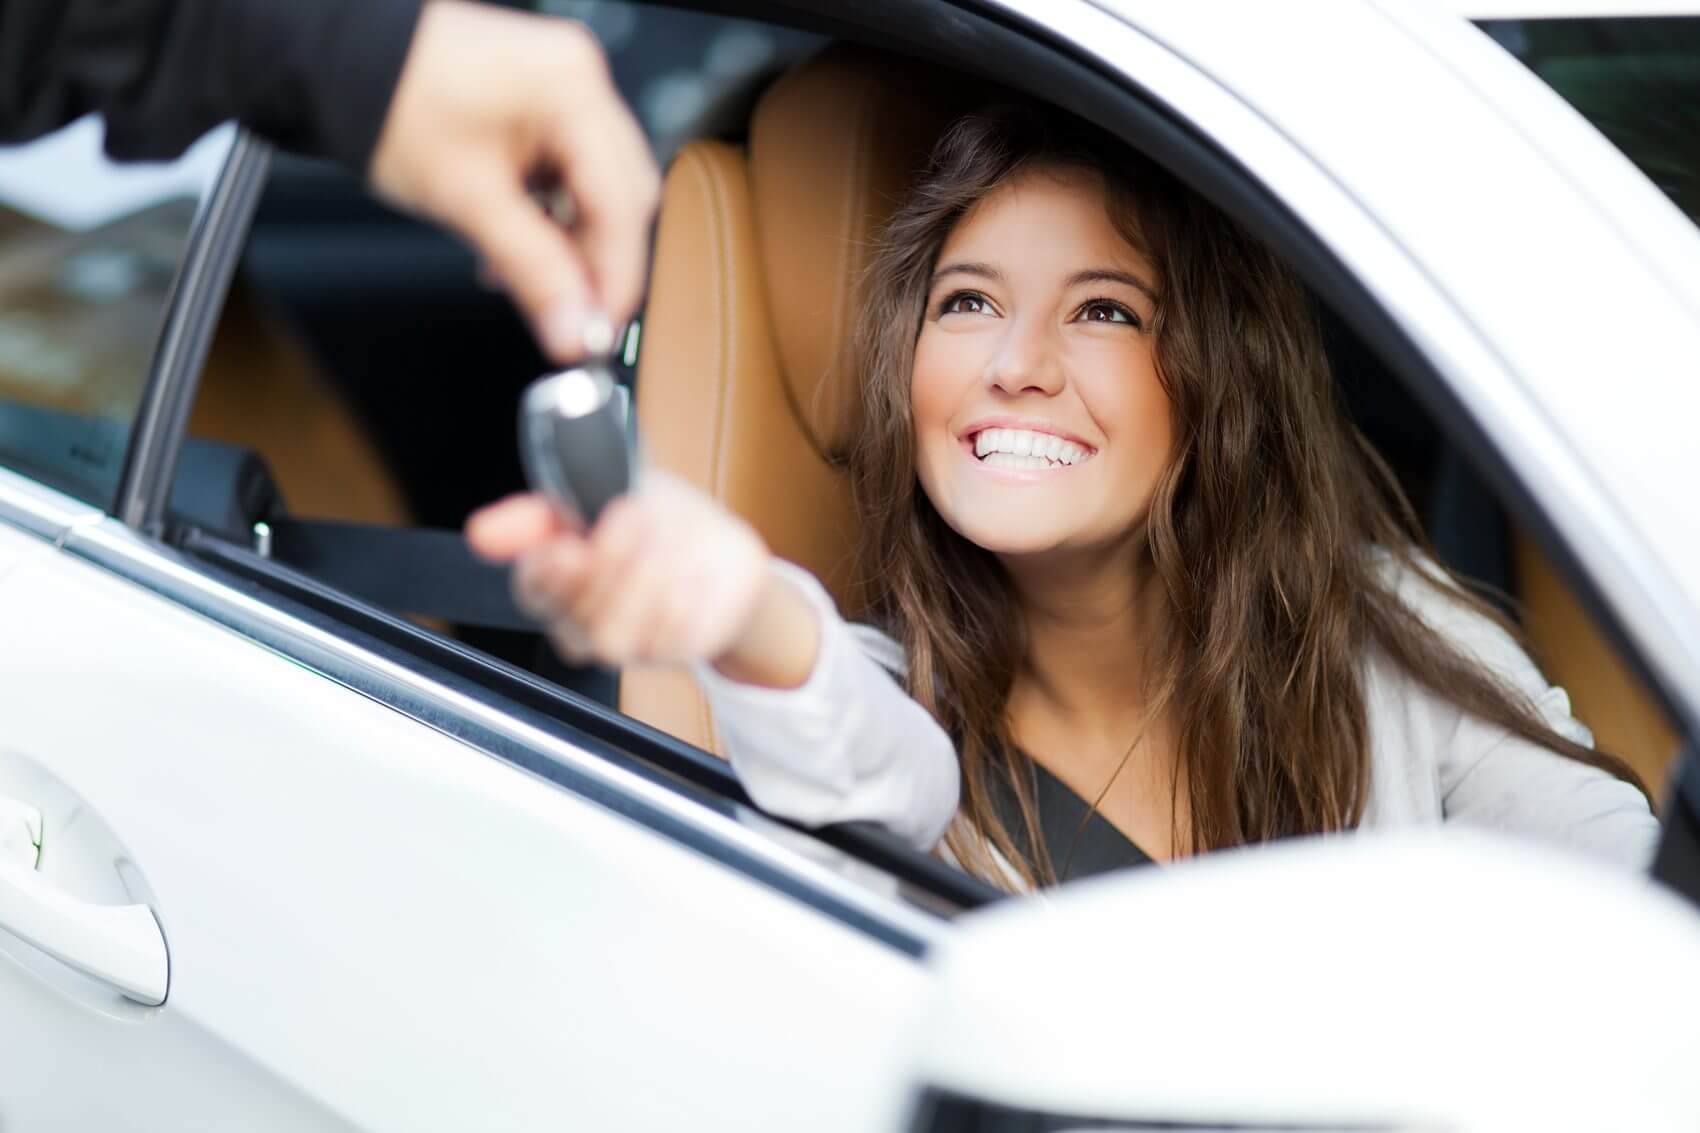 temporary insurance for young drivers buying new car